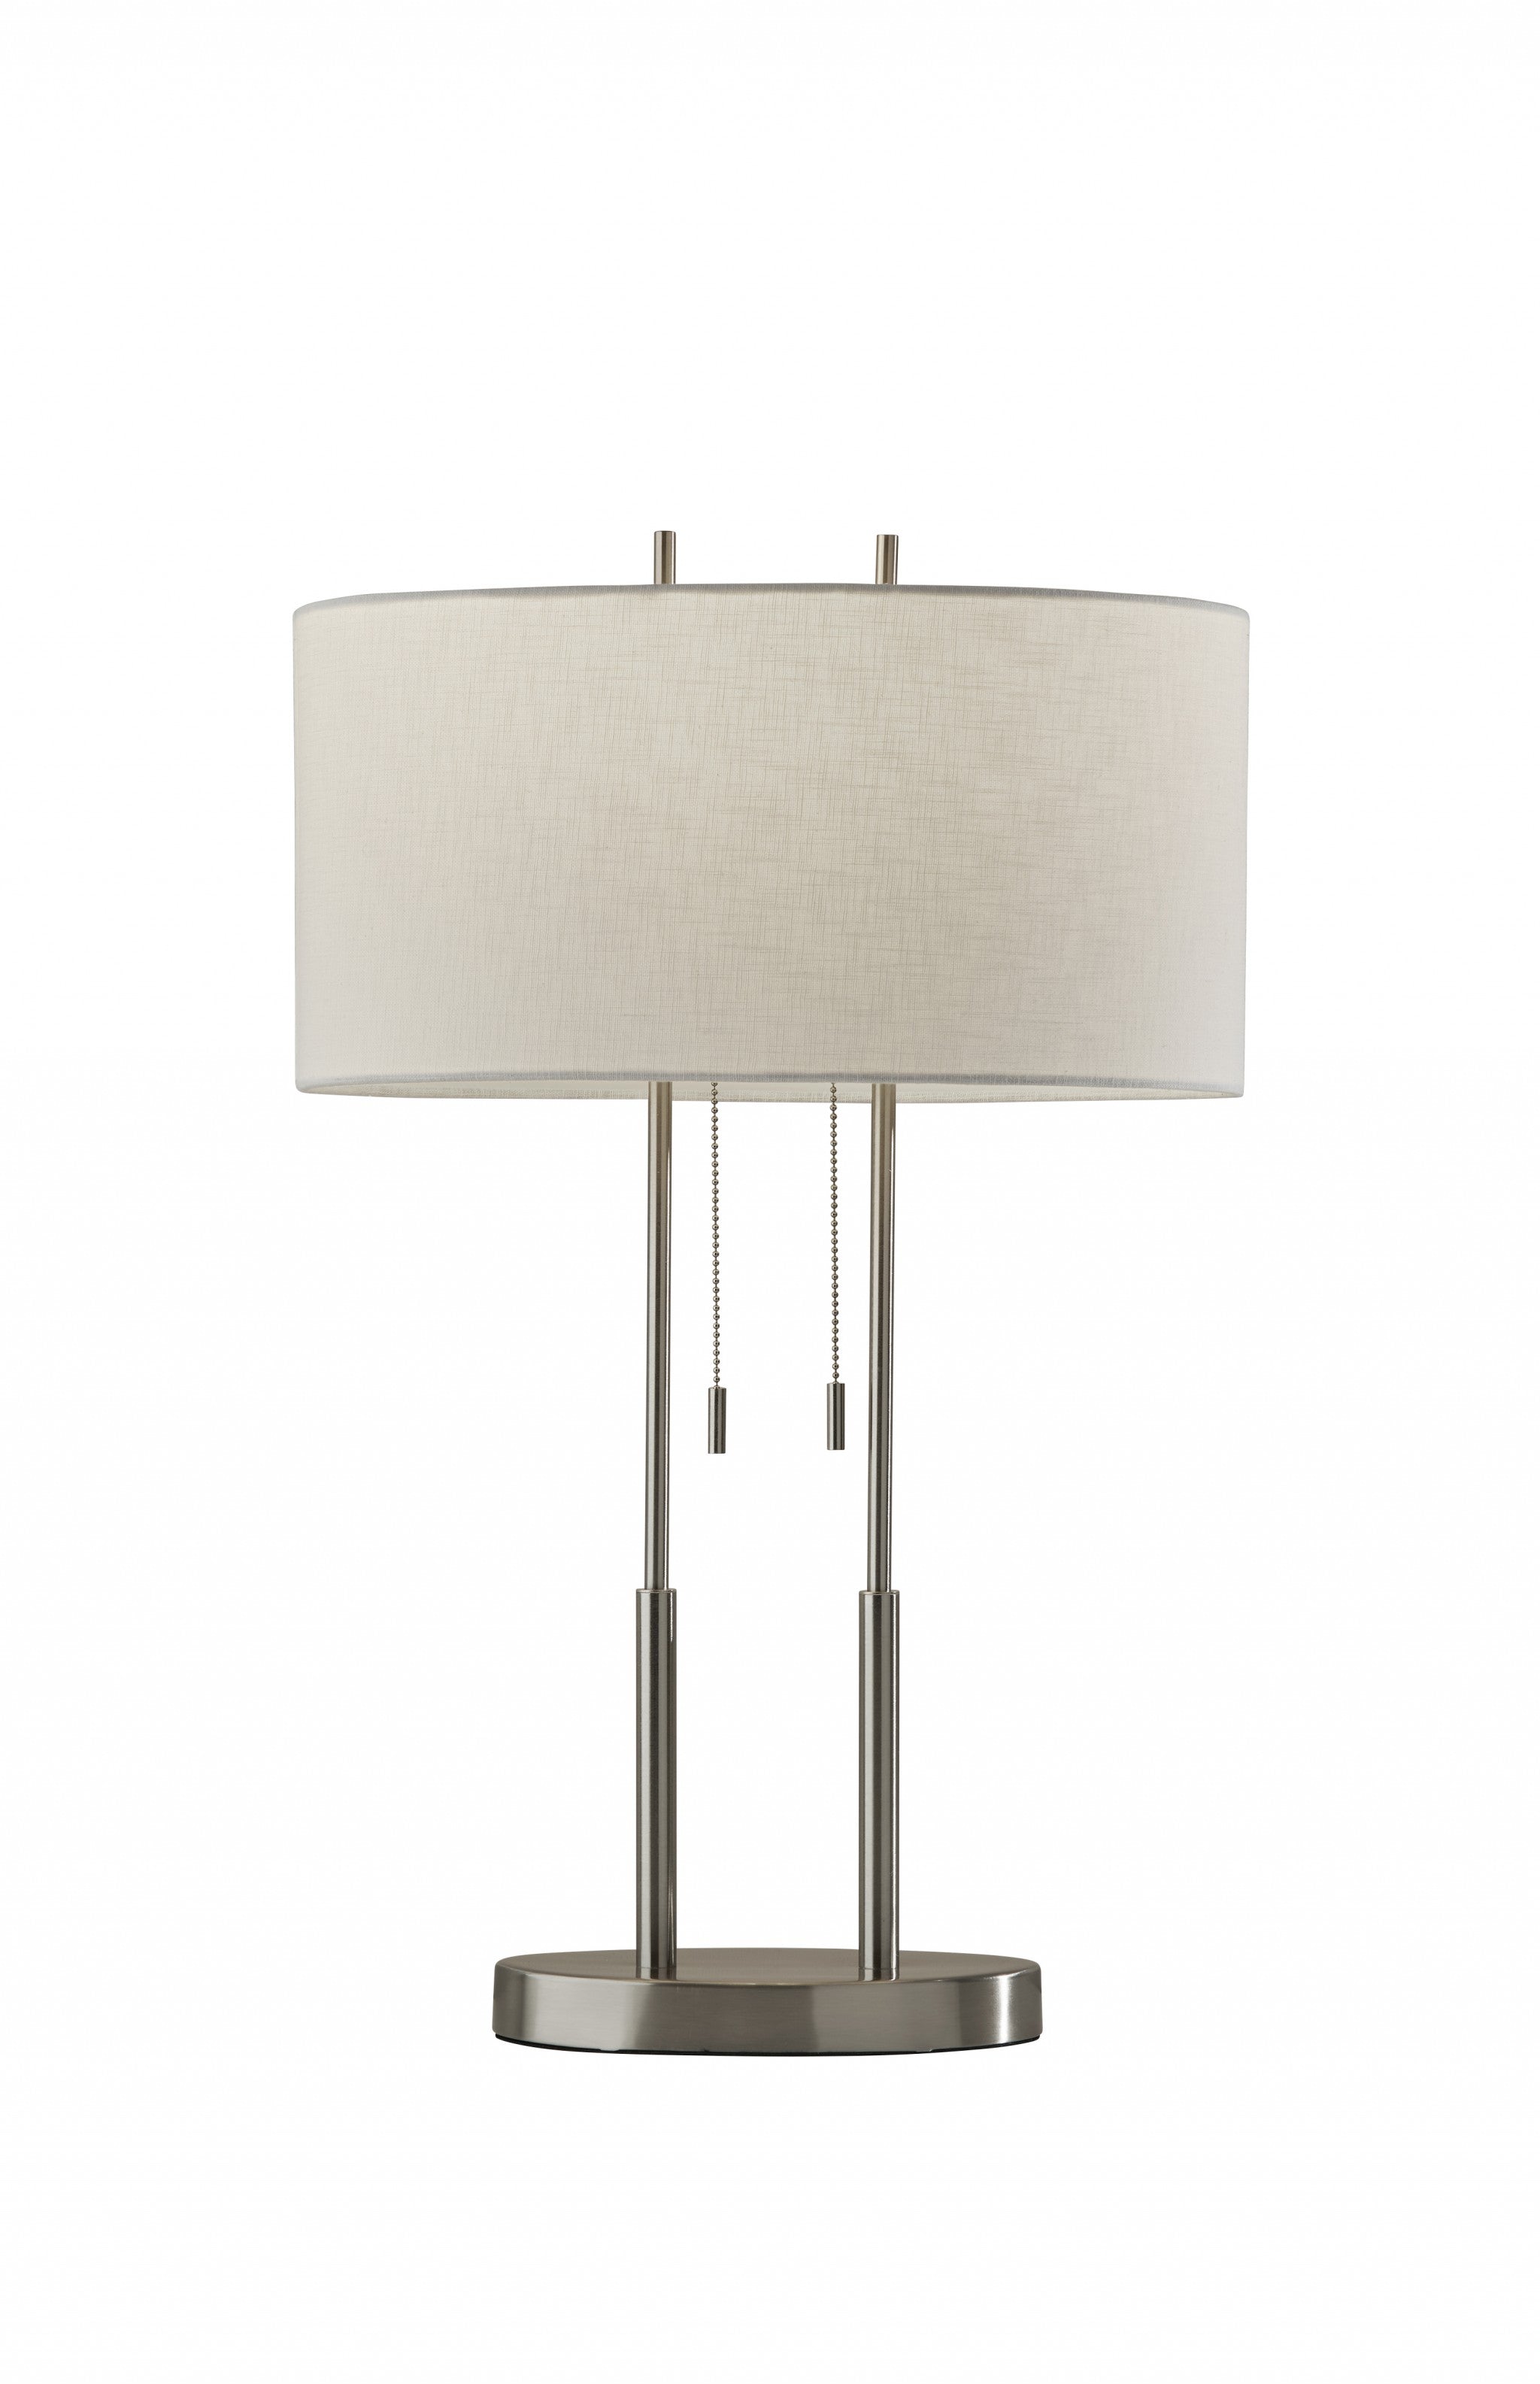 27" Silver Metal Bedside Table Lamp With White Shade